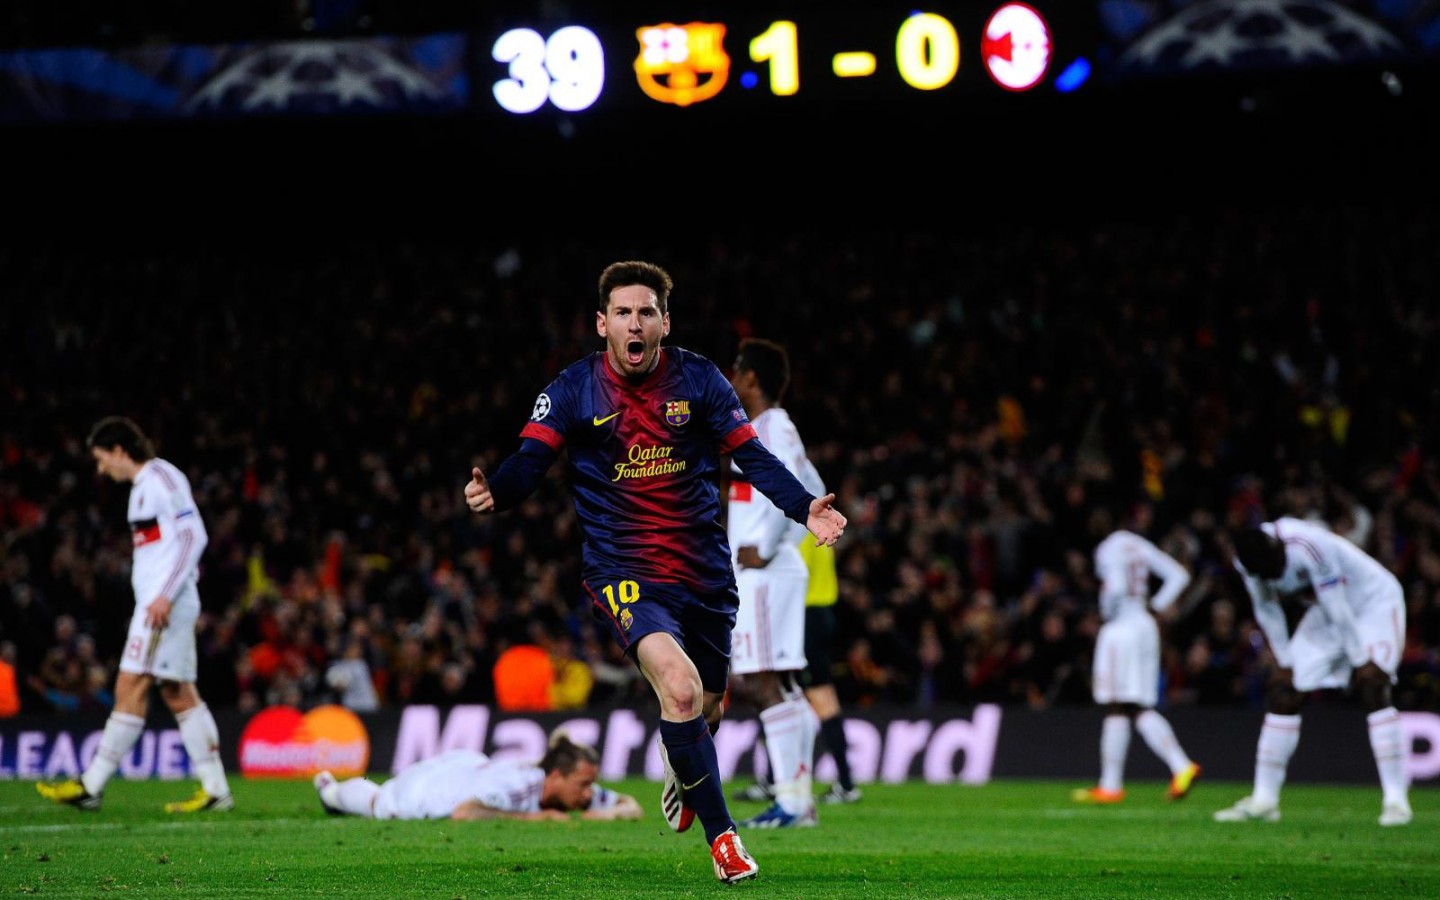 Lionel Messi Wallpaper 2015 Background 1 HD Wallpapers amagico